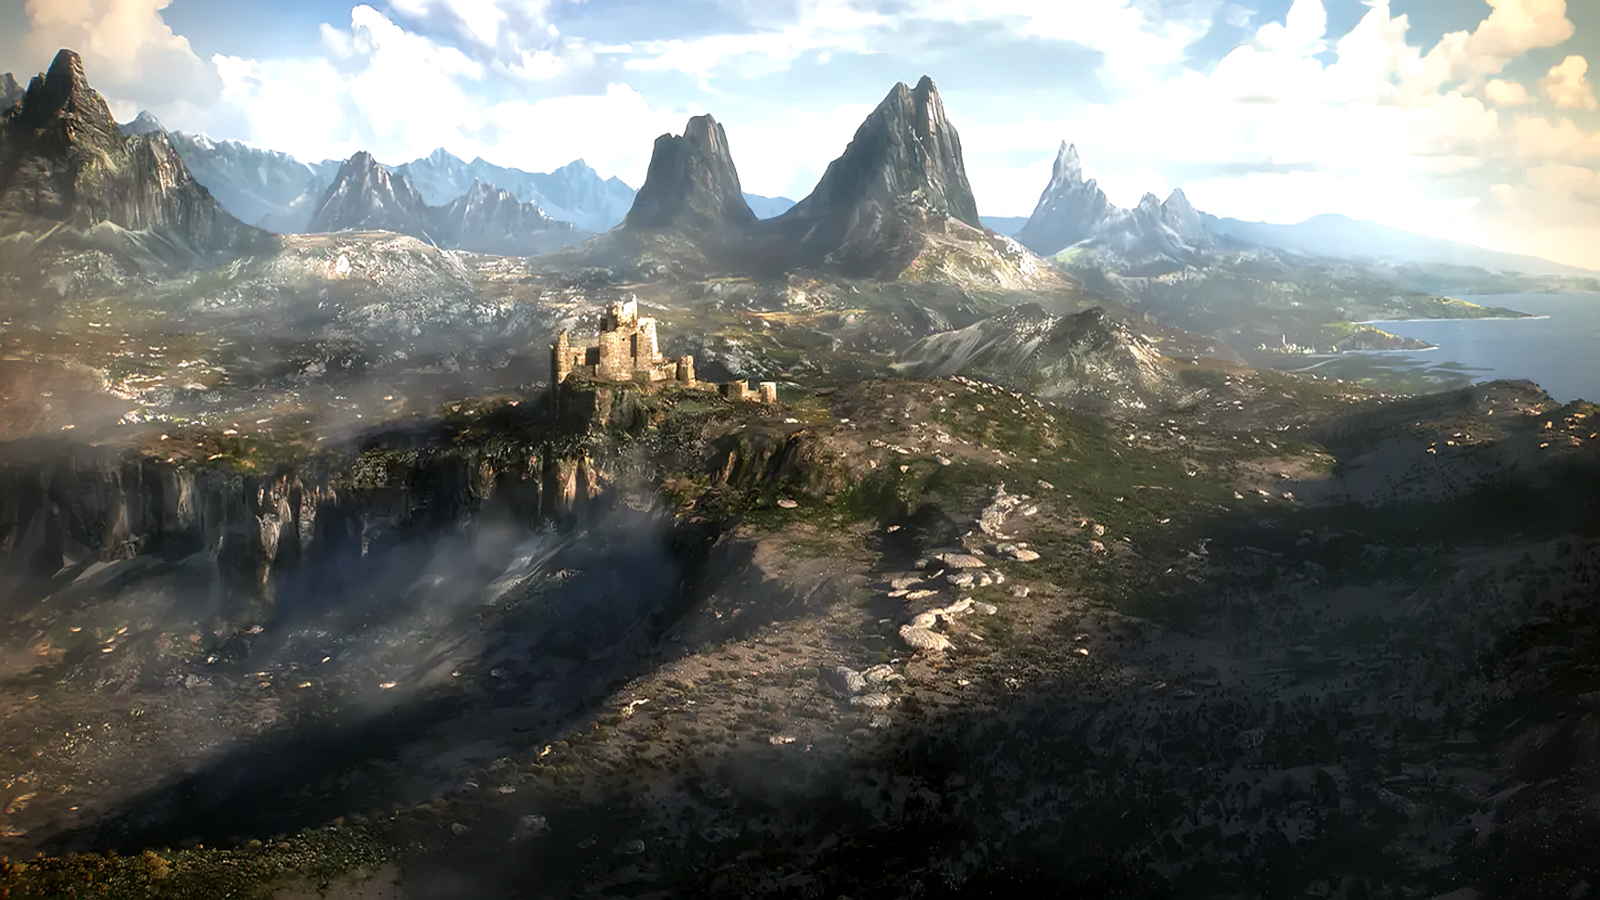 Bethesda's Todd Howard only agreed to announce the Elder Scrolls 6